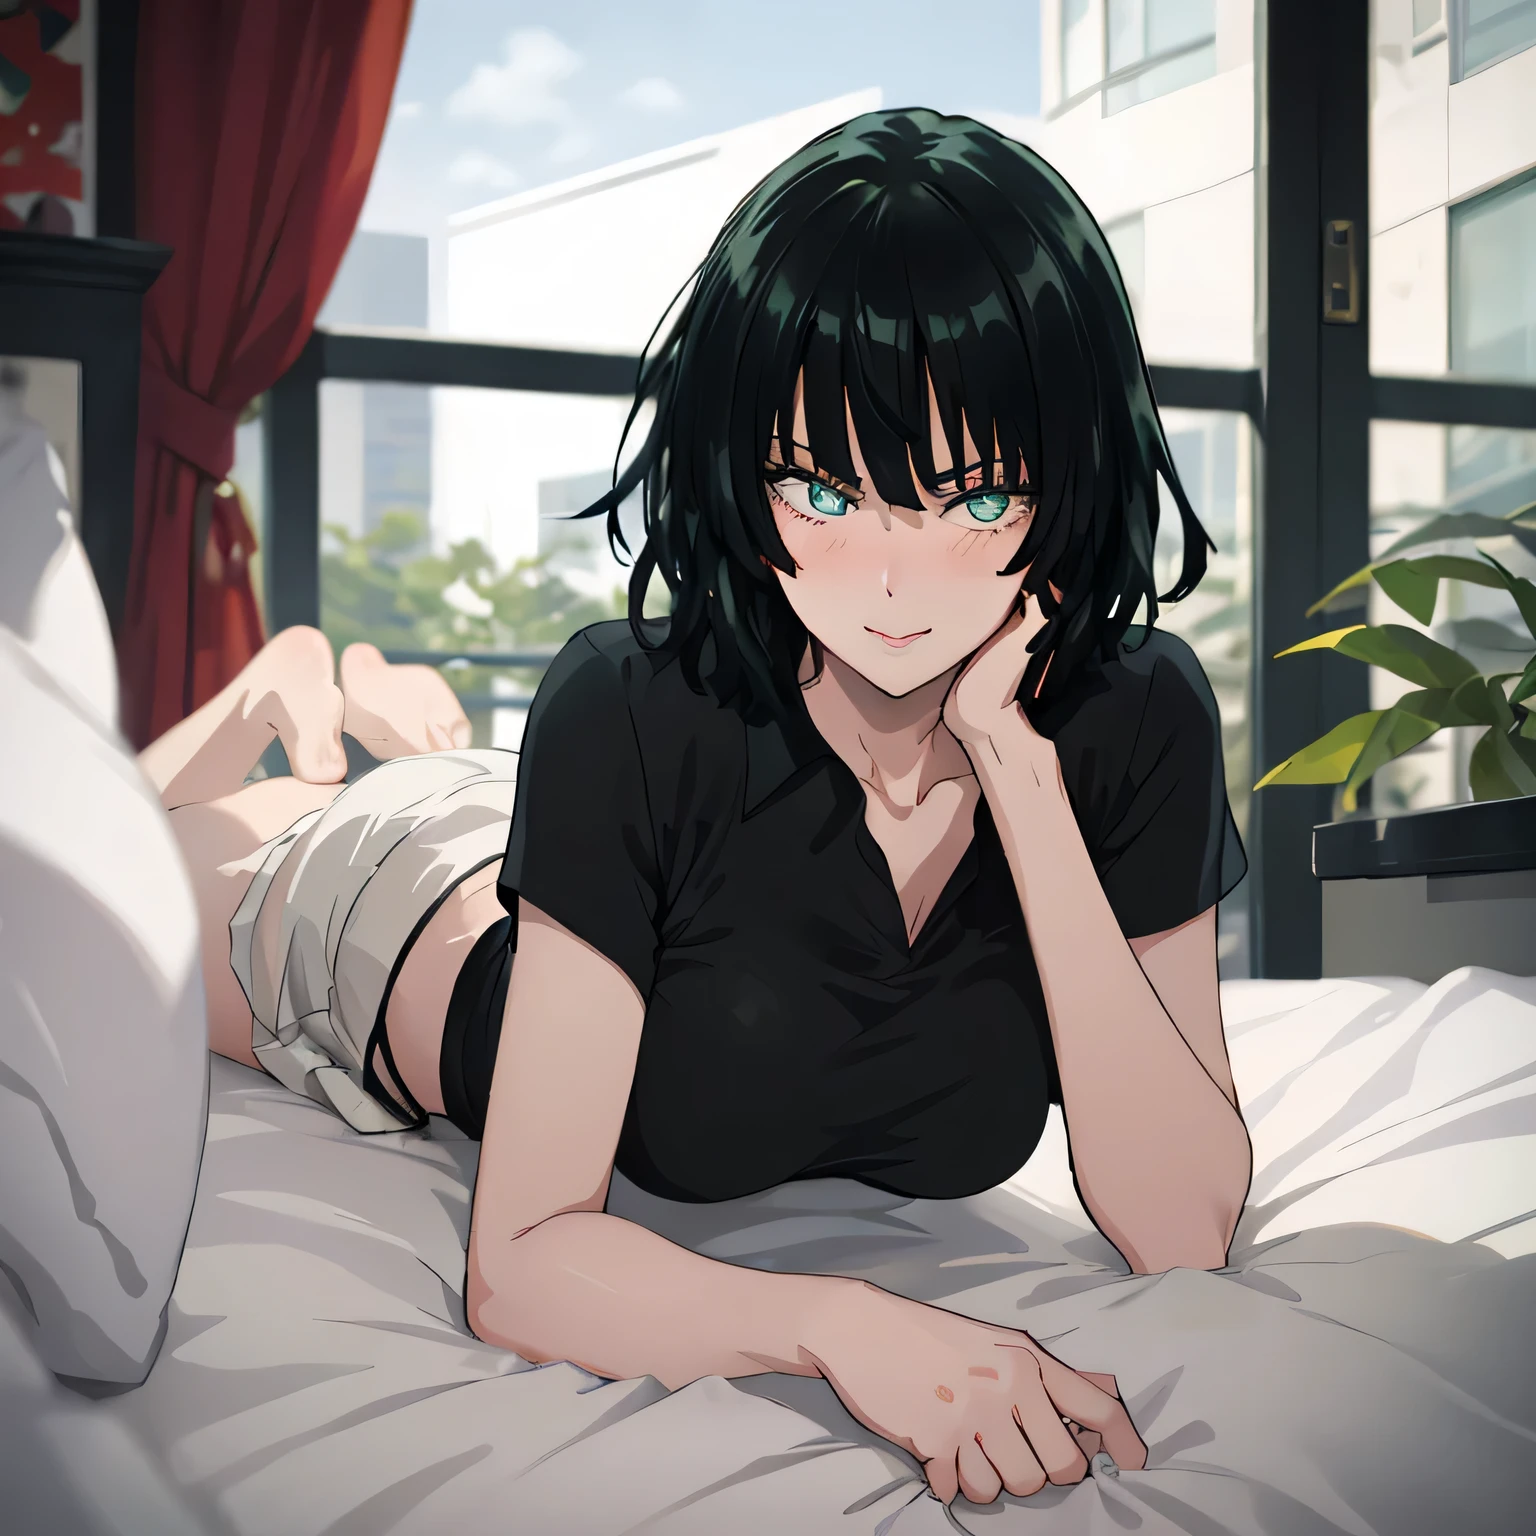 1 girl, narrow waist, sexy hips, full body view, Fubuki laying in bed with her face blushing while she looks at the viewer, she is smiling in a flirty manner, kind of signaling with her eyes to come to bed with her, masterpiece, no blurring, ultra HD, smooth, perfect